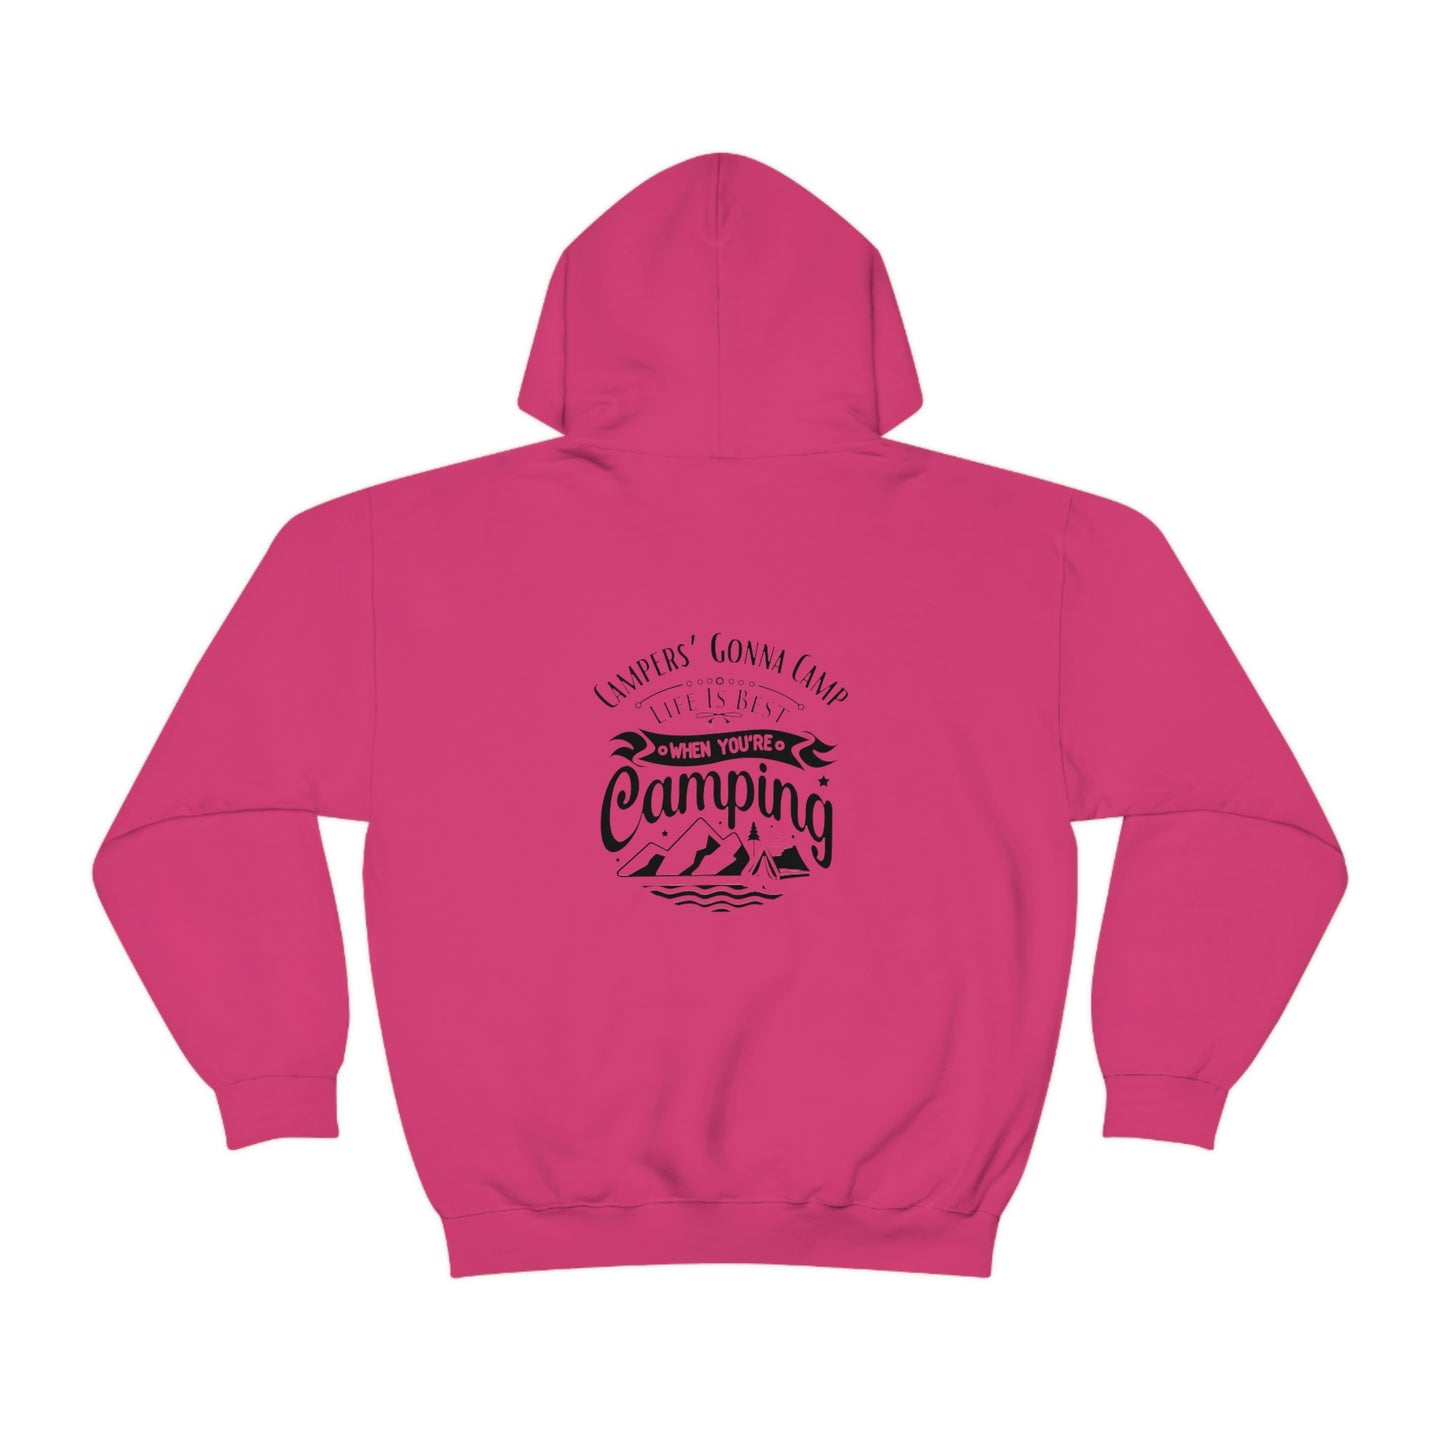 ‘Campers Gonna Camp’ Printed Front & Back.  Unisex Heavy Blend™ Hooded Sweatshirt